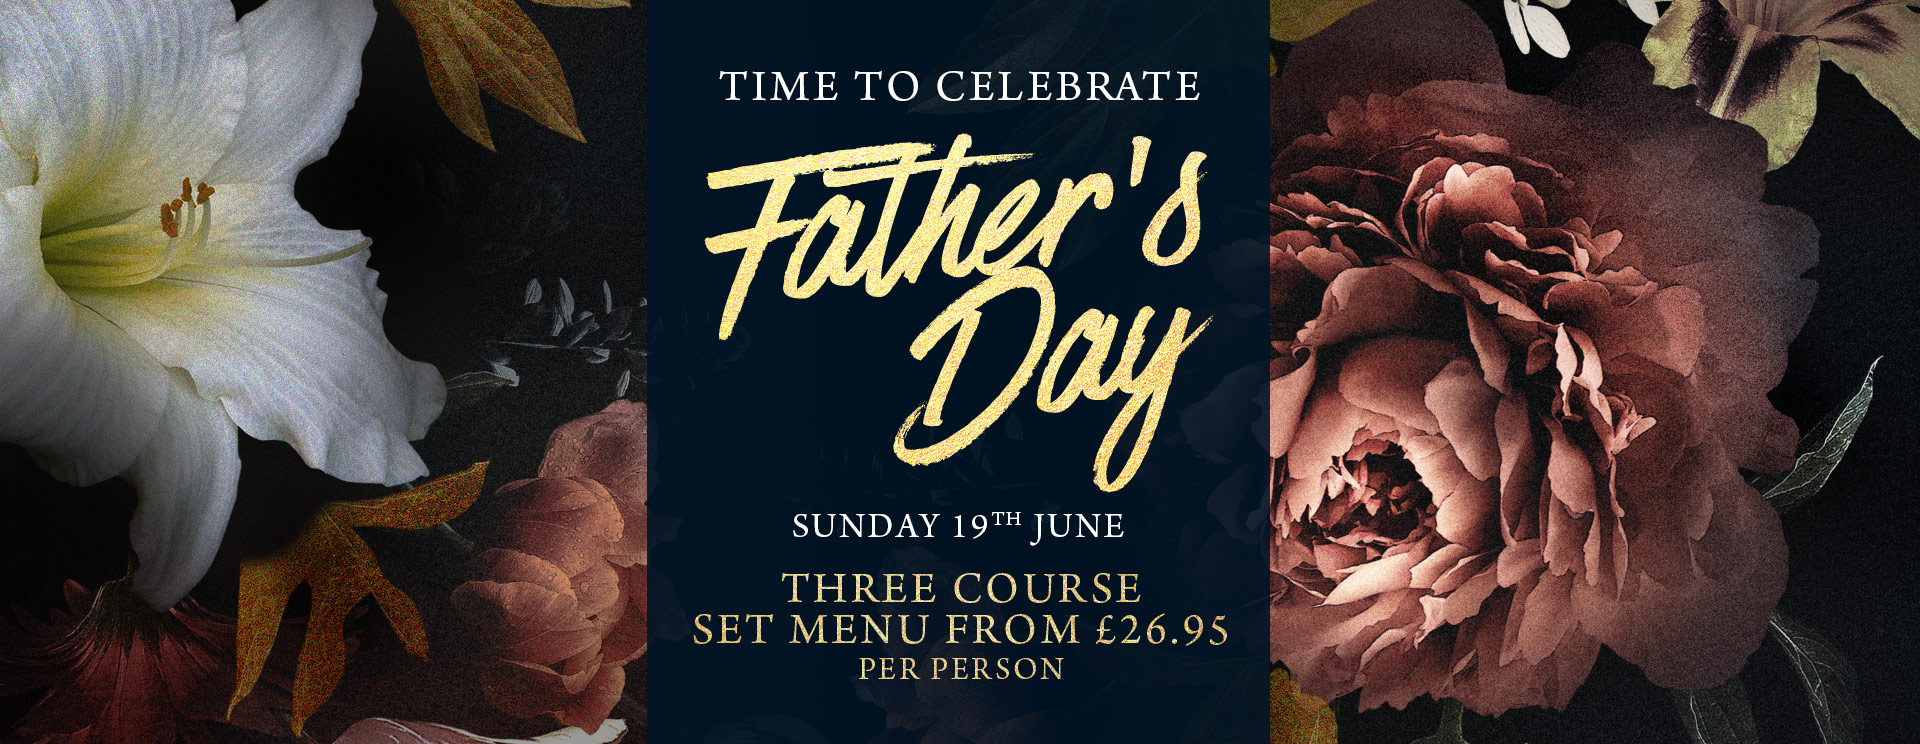 Fathers Day at The Deer Park